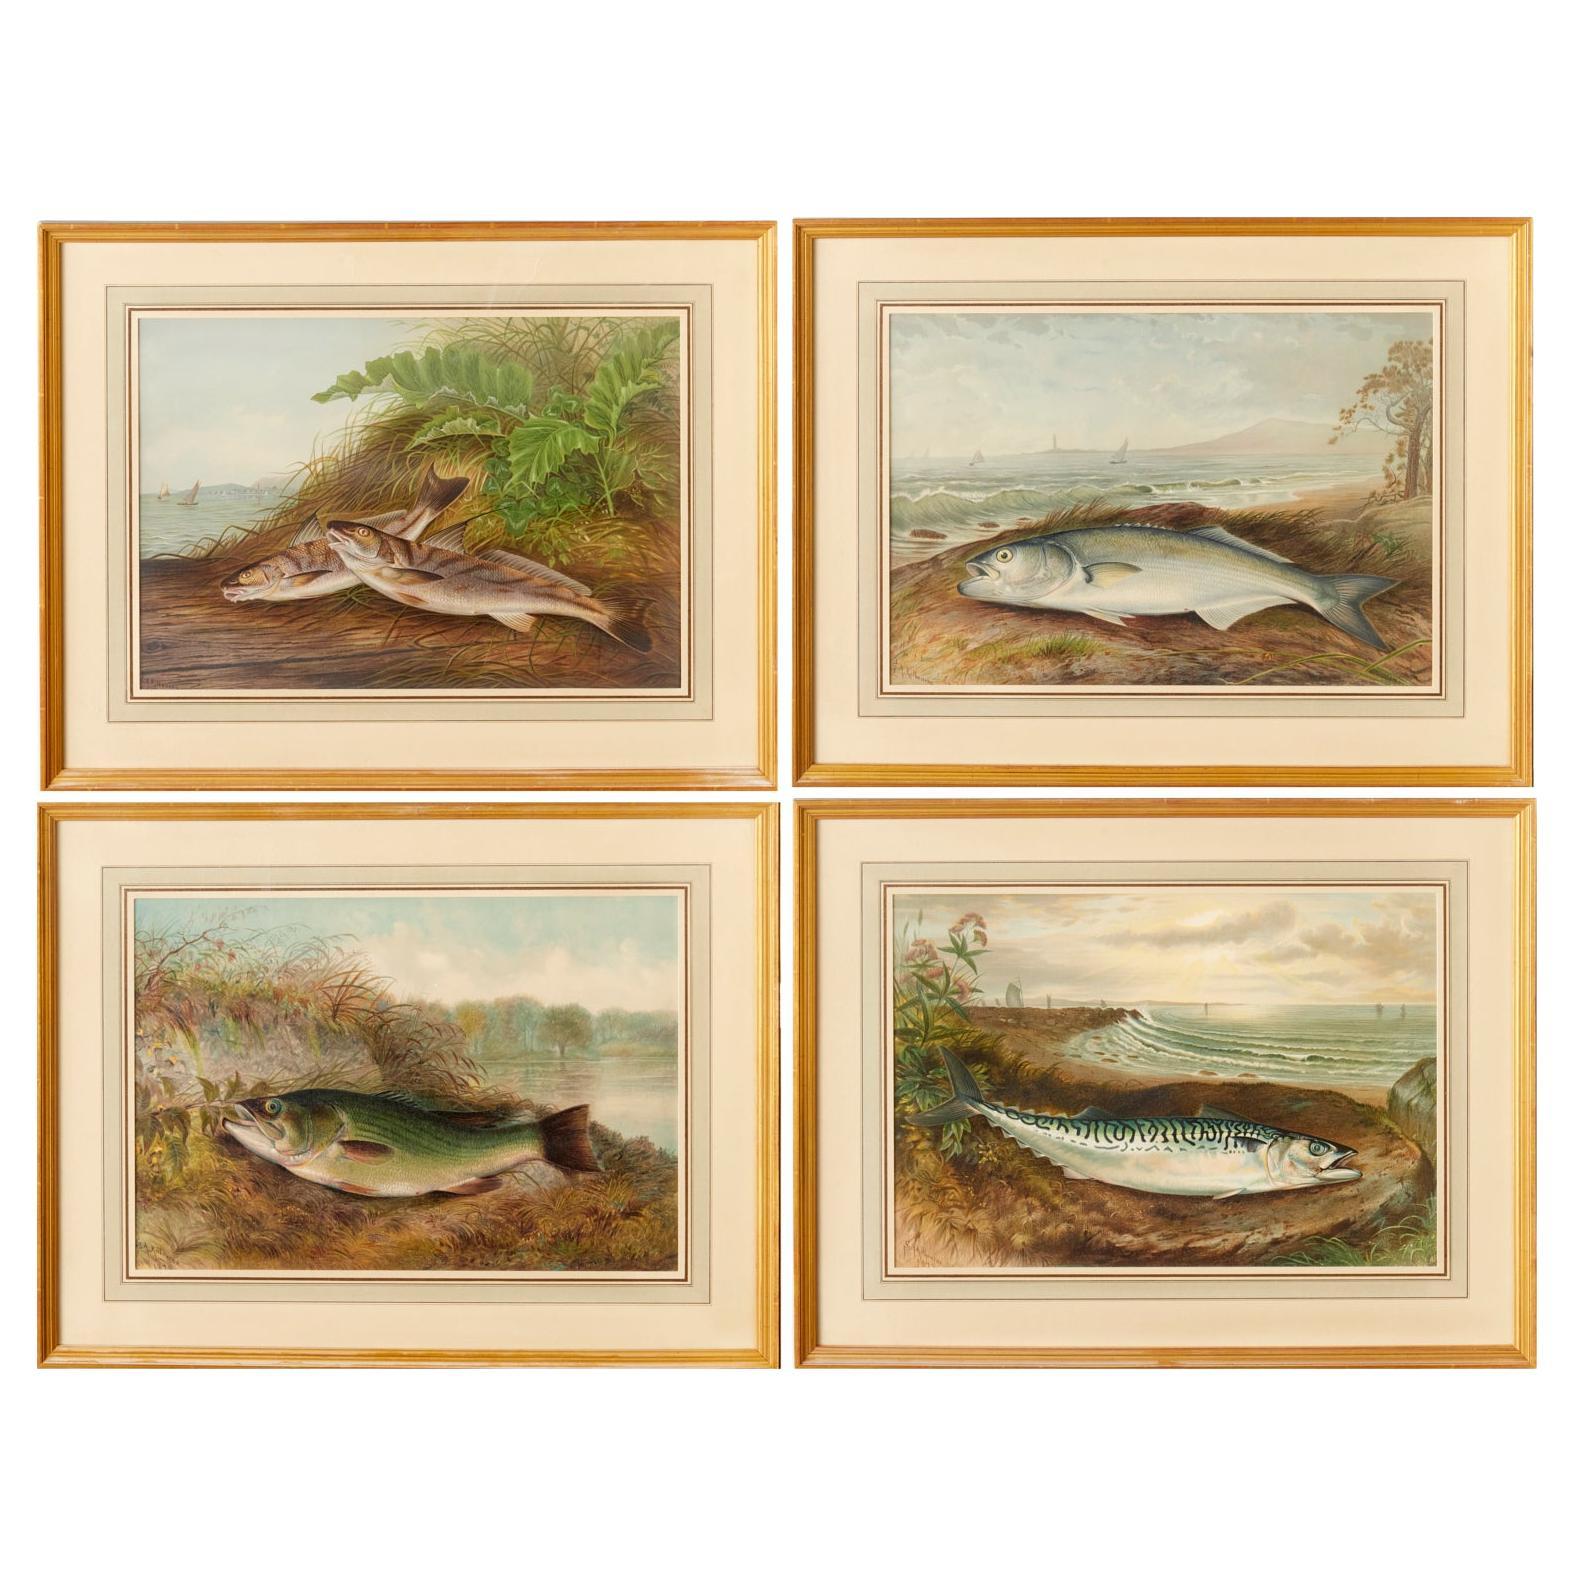 S. A. Kilbourne: „Game Fishes of the United States“, 4 gerahmte Chromolithographien 